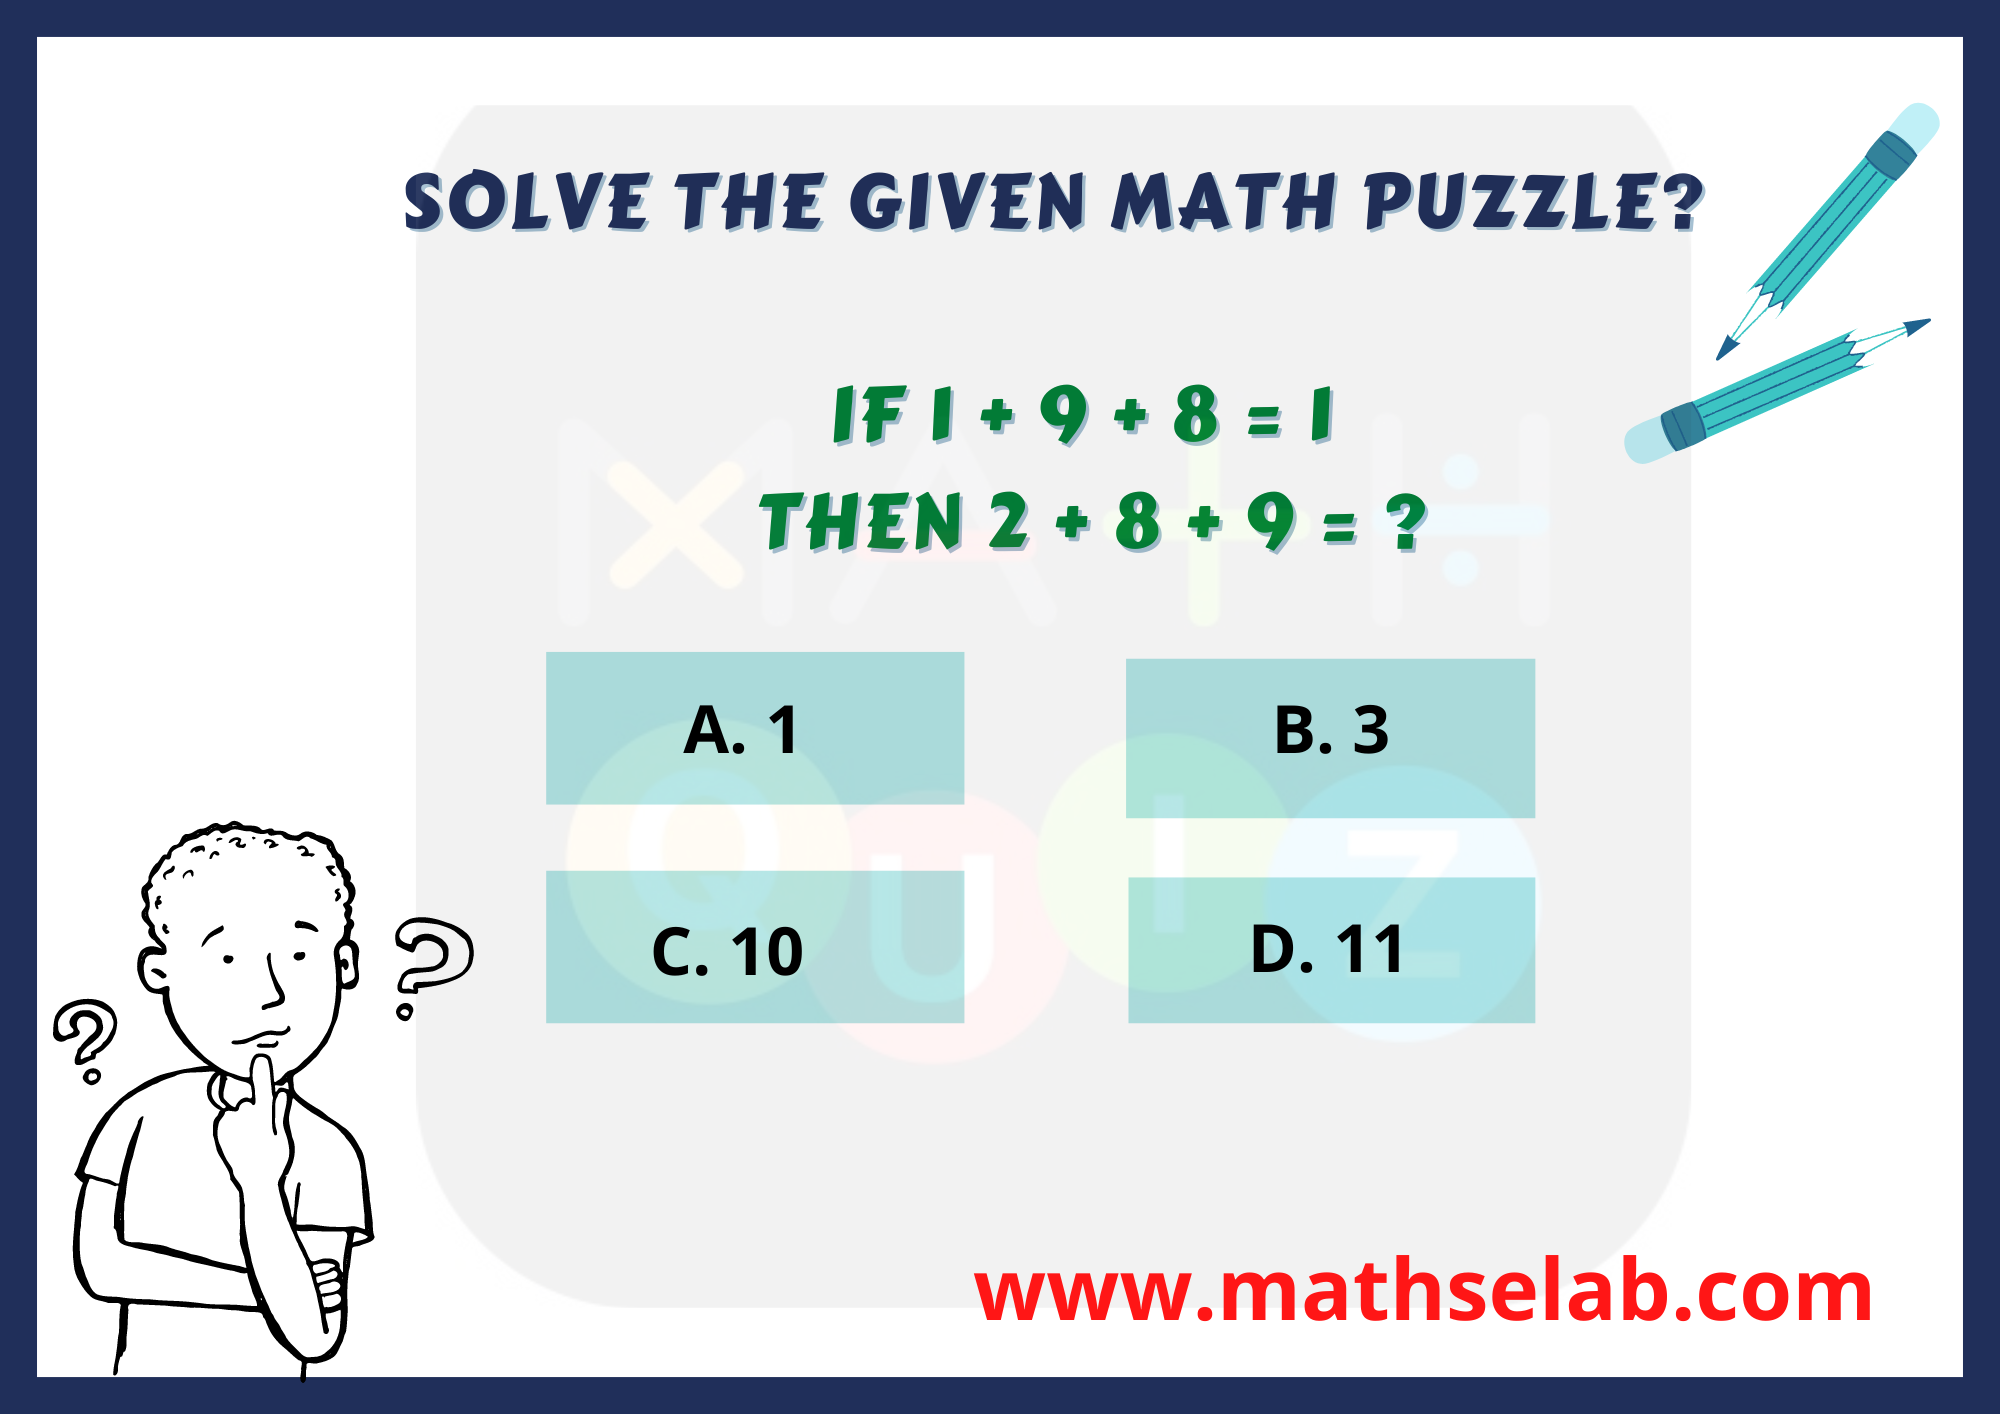 Solve the given math puzzle?  If 1 + 9 + 8 = 1  then 2 + 8 + 9 = ?